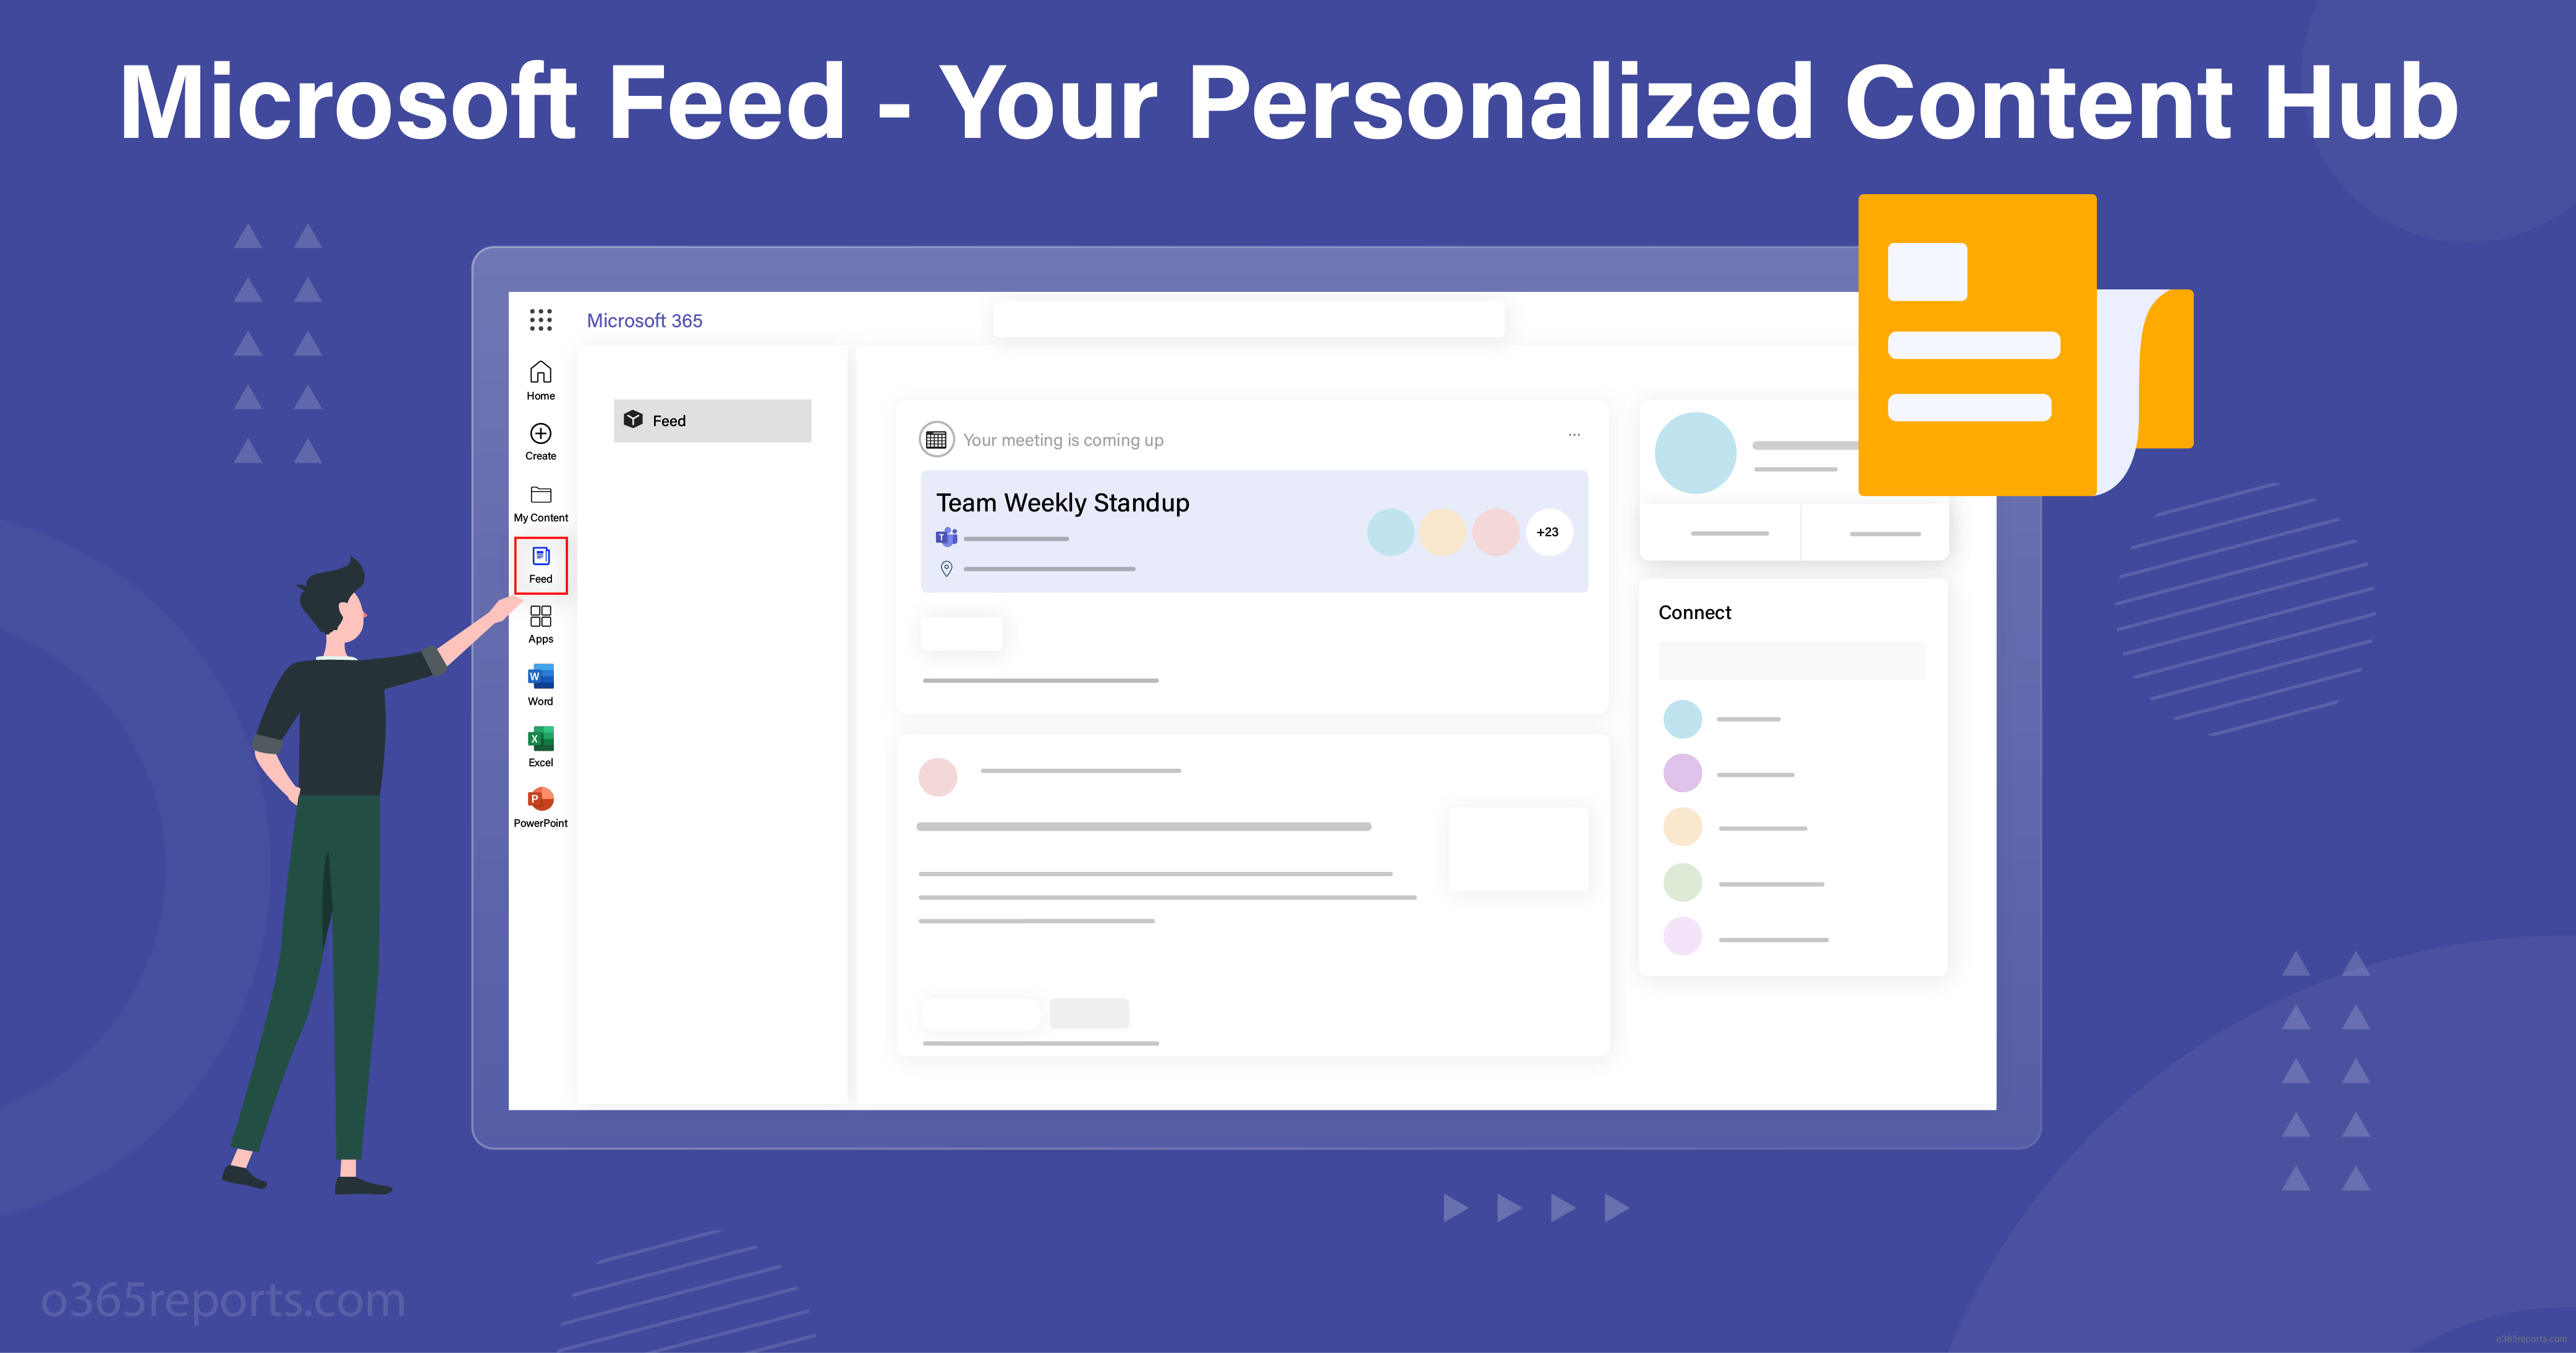 Microsoft Feed - Your Personalized Content Hub